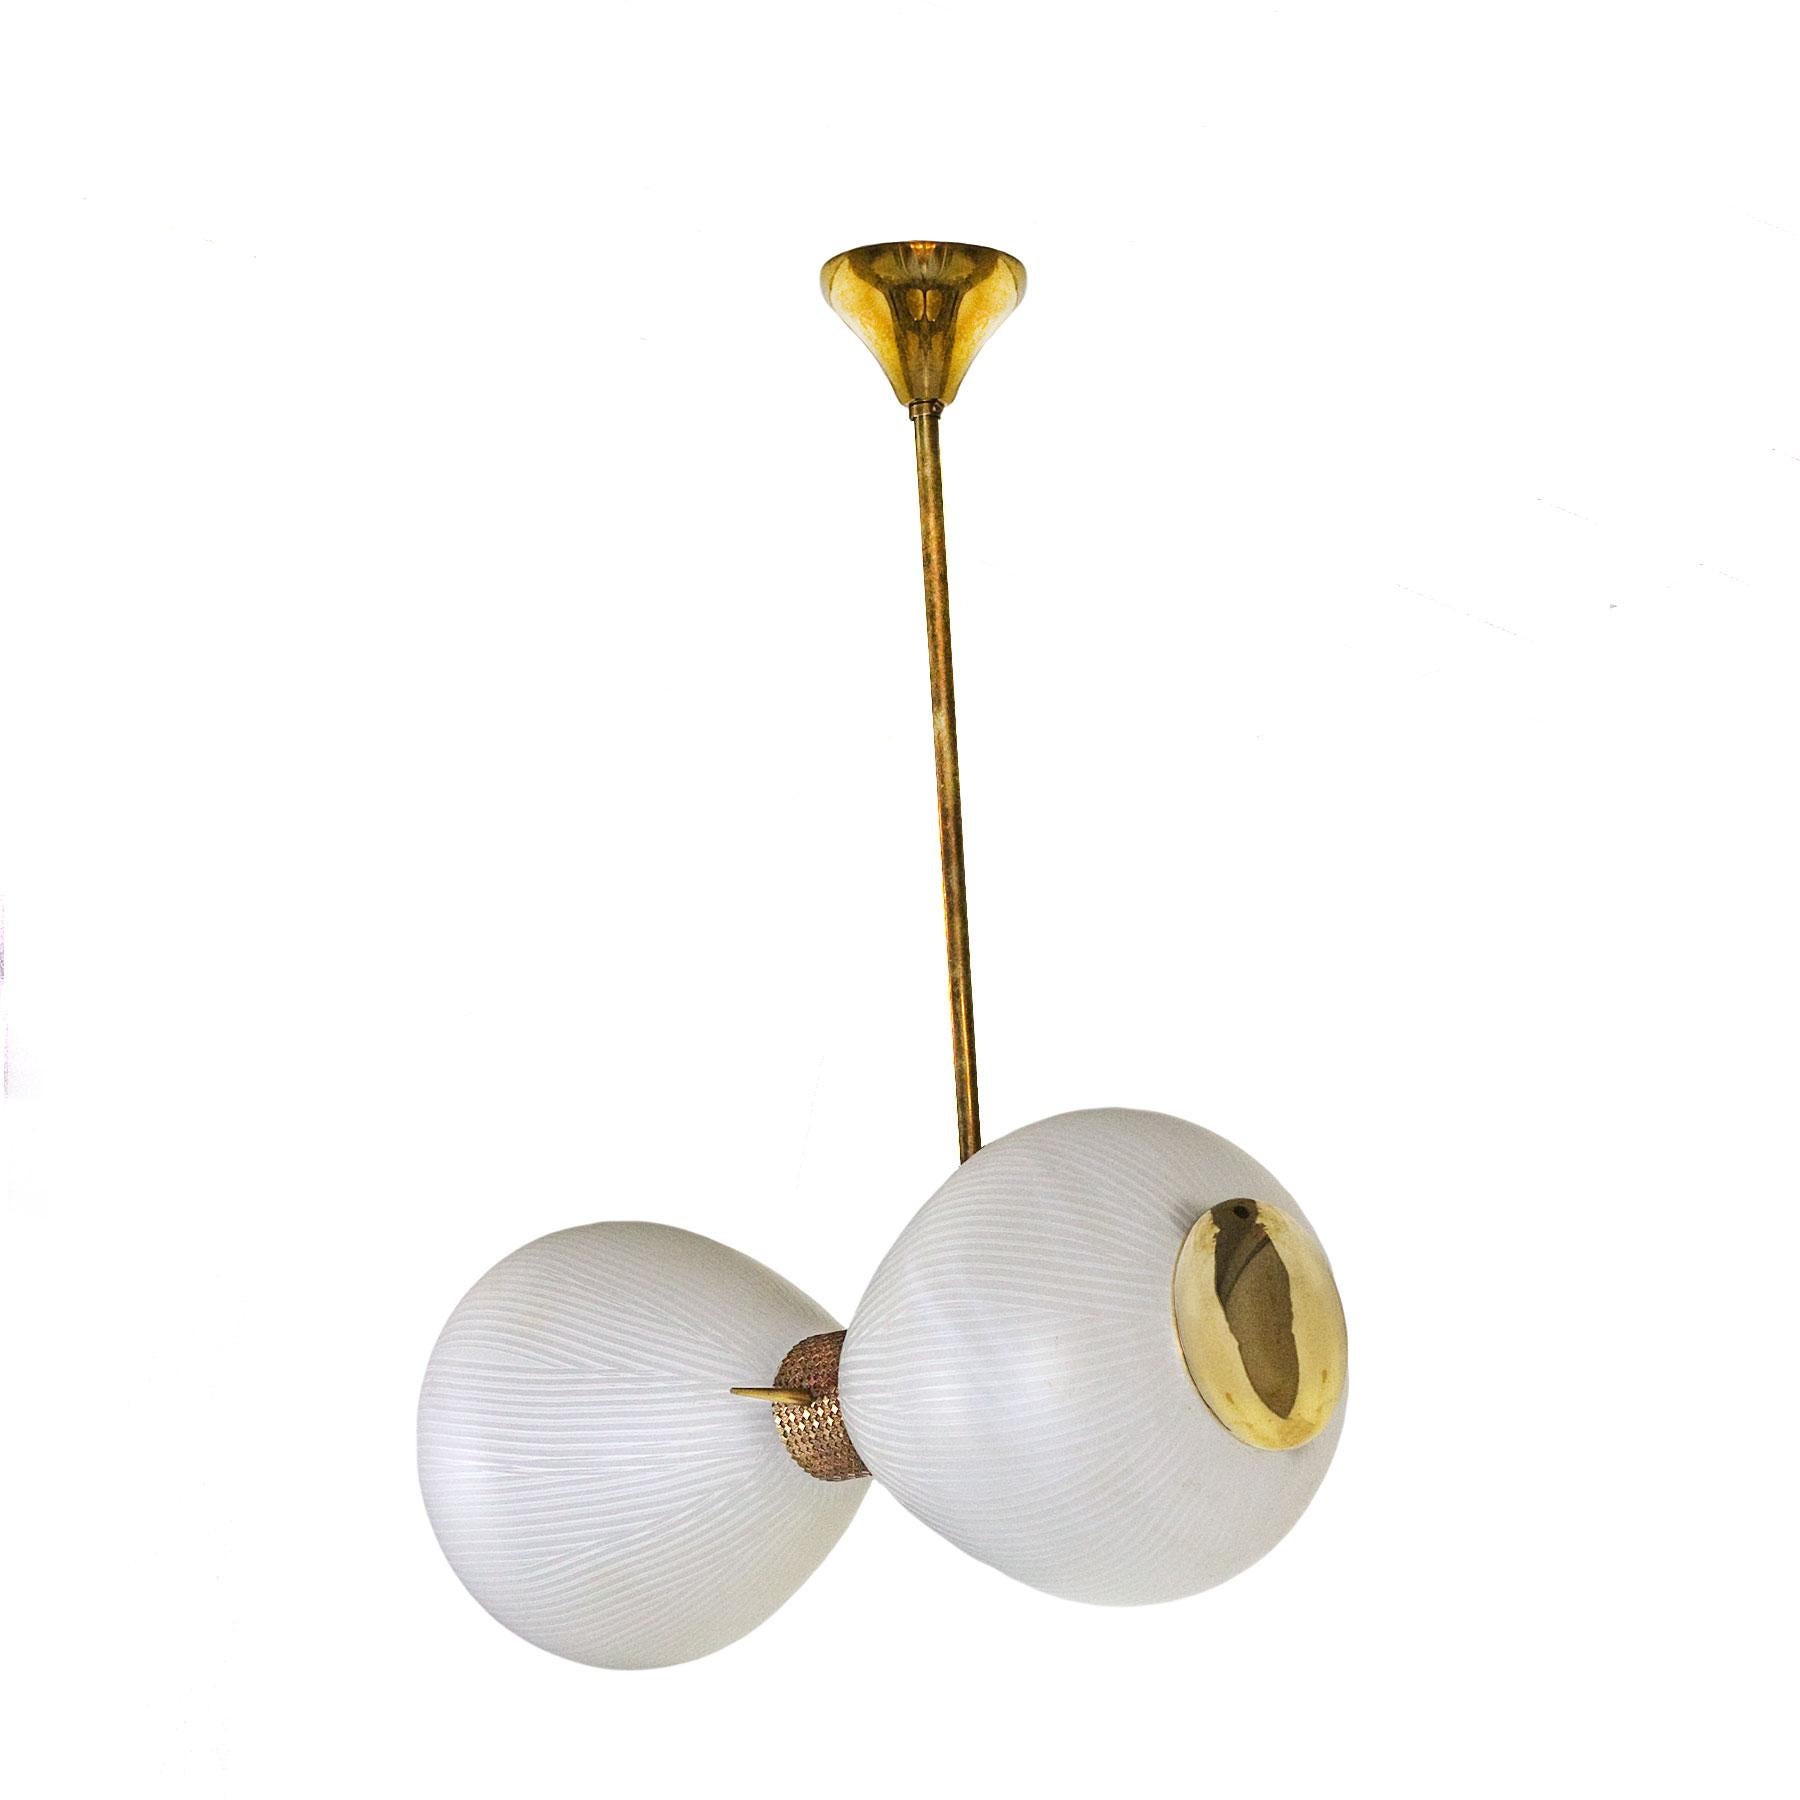 Ravishing Murano two grooved cast glass globes pendant, polished brass decentered suspension shaft. Polished golden brass ring with squares and flowers patterns. Two brass hatches giving access to bulbs lights.
Maker: Venini Co
Murano, Italy,